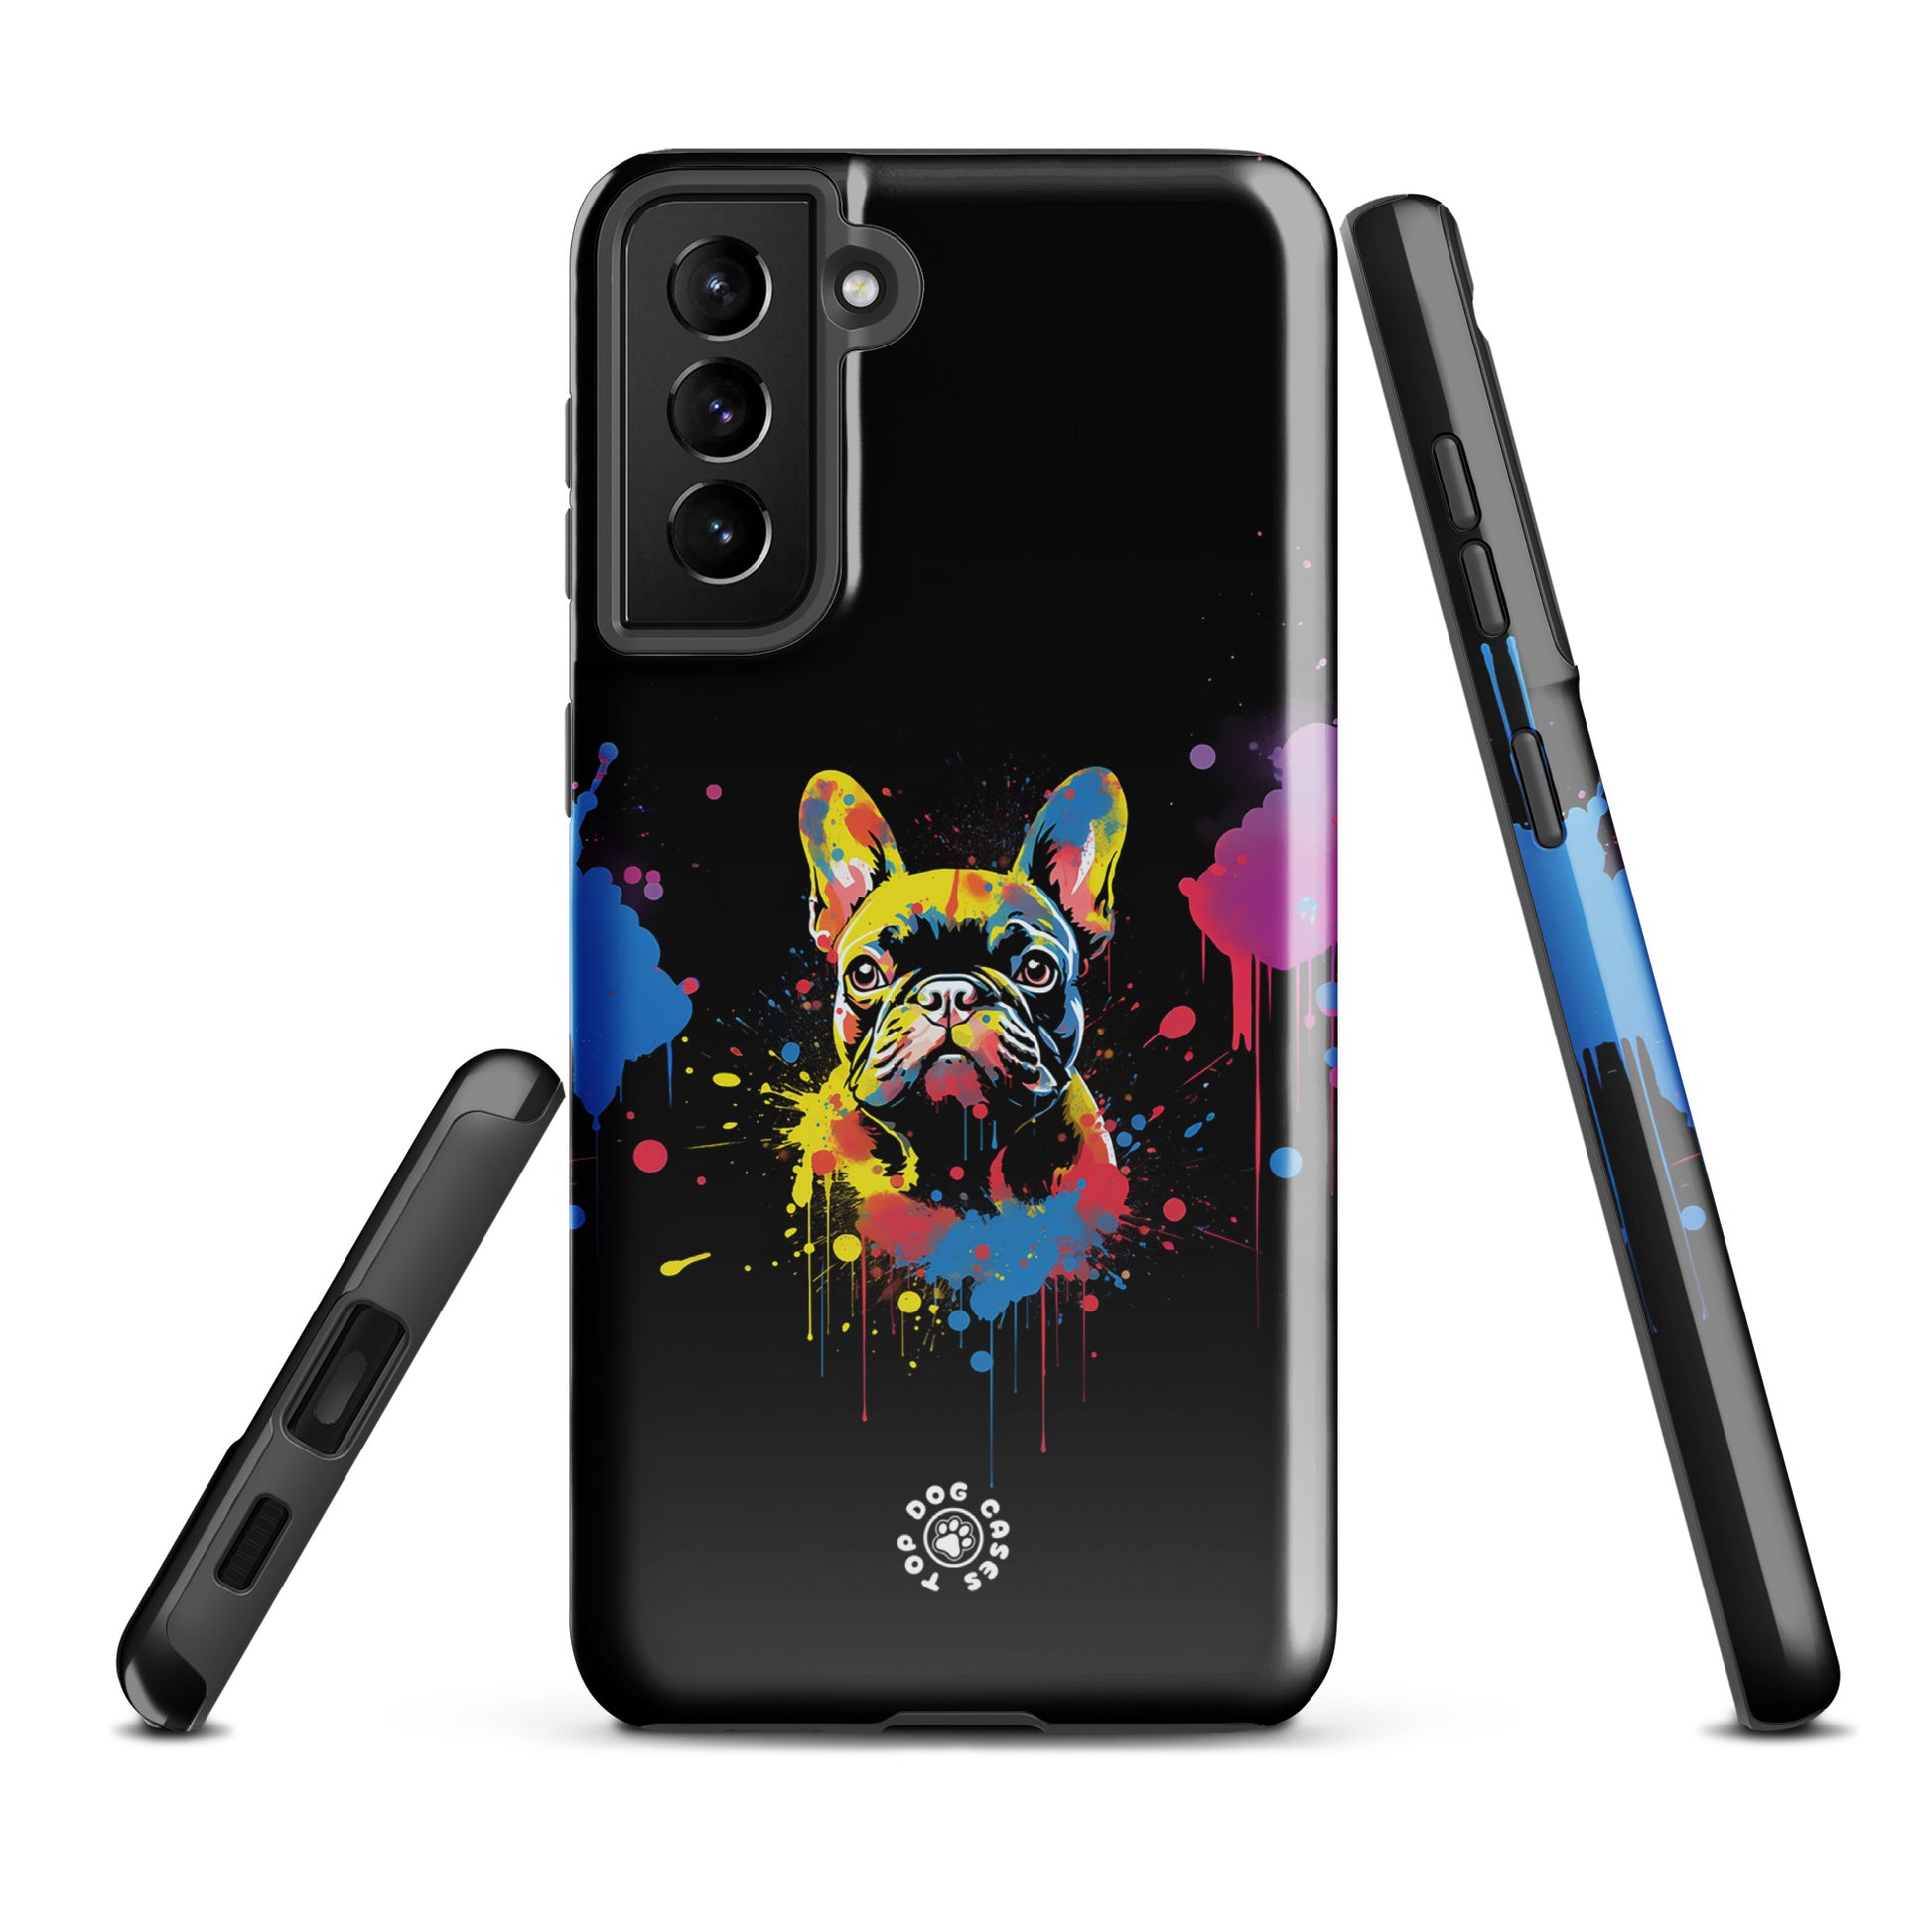 French Bulldog - Colorful Phone Case - Samsung - Top Dog Cases - #ColorfulPhoneCases, #DogPhoneCase, #dogs, #French Bulldog, #FrenchBulldog, #Samsung, #SamsungGalaxy, #SamsungGalaxyCase, #SamsungGalaxyS10, #SamsungGalaxyS20, #SamsungGalaxyS21, #SamsungGalaxyS22, #SamsungGalaxyS22Ultra, #SamsungGalaxyS23, #SamsungGalaxyS23Plus, #SamsungGalaxyS23Ultra, #SamsungPhoneCase, #ToughCase, SamsungGalaxyS20Plus, SamsungGalaxyS22Plus